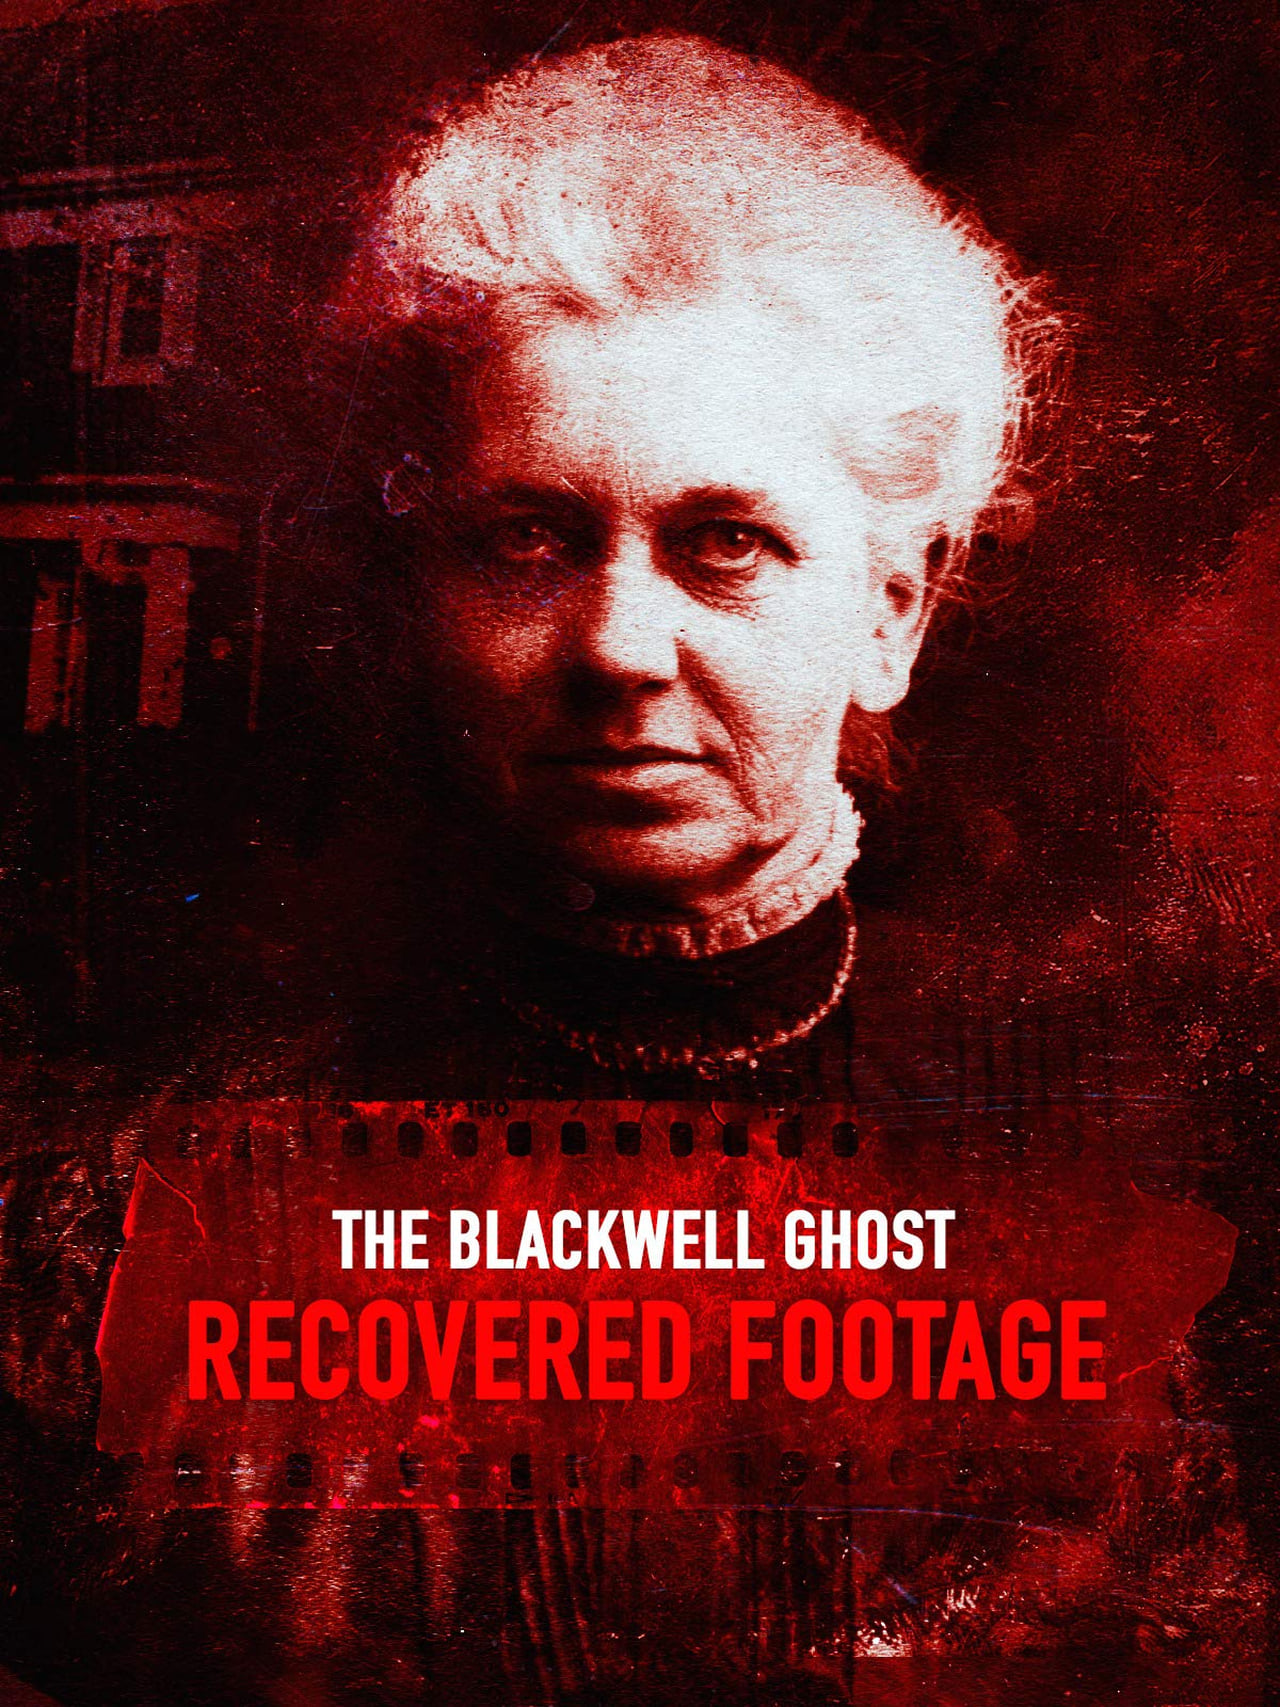 The Blackwell Ghost: Recovered Footage